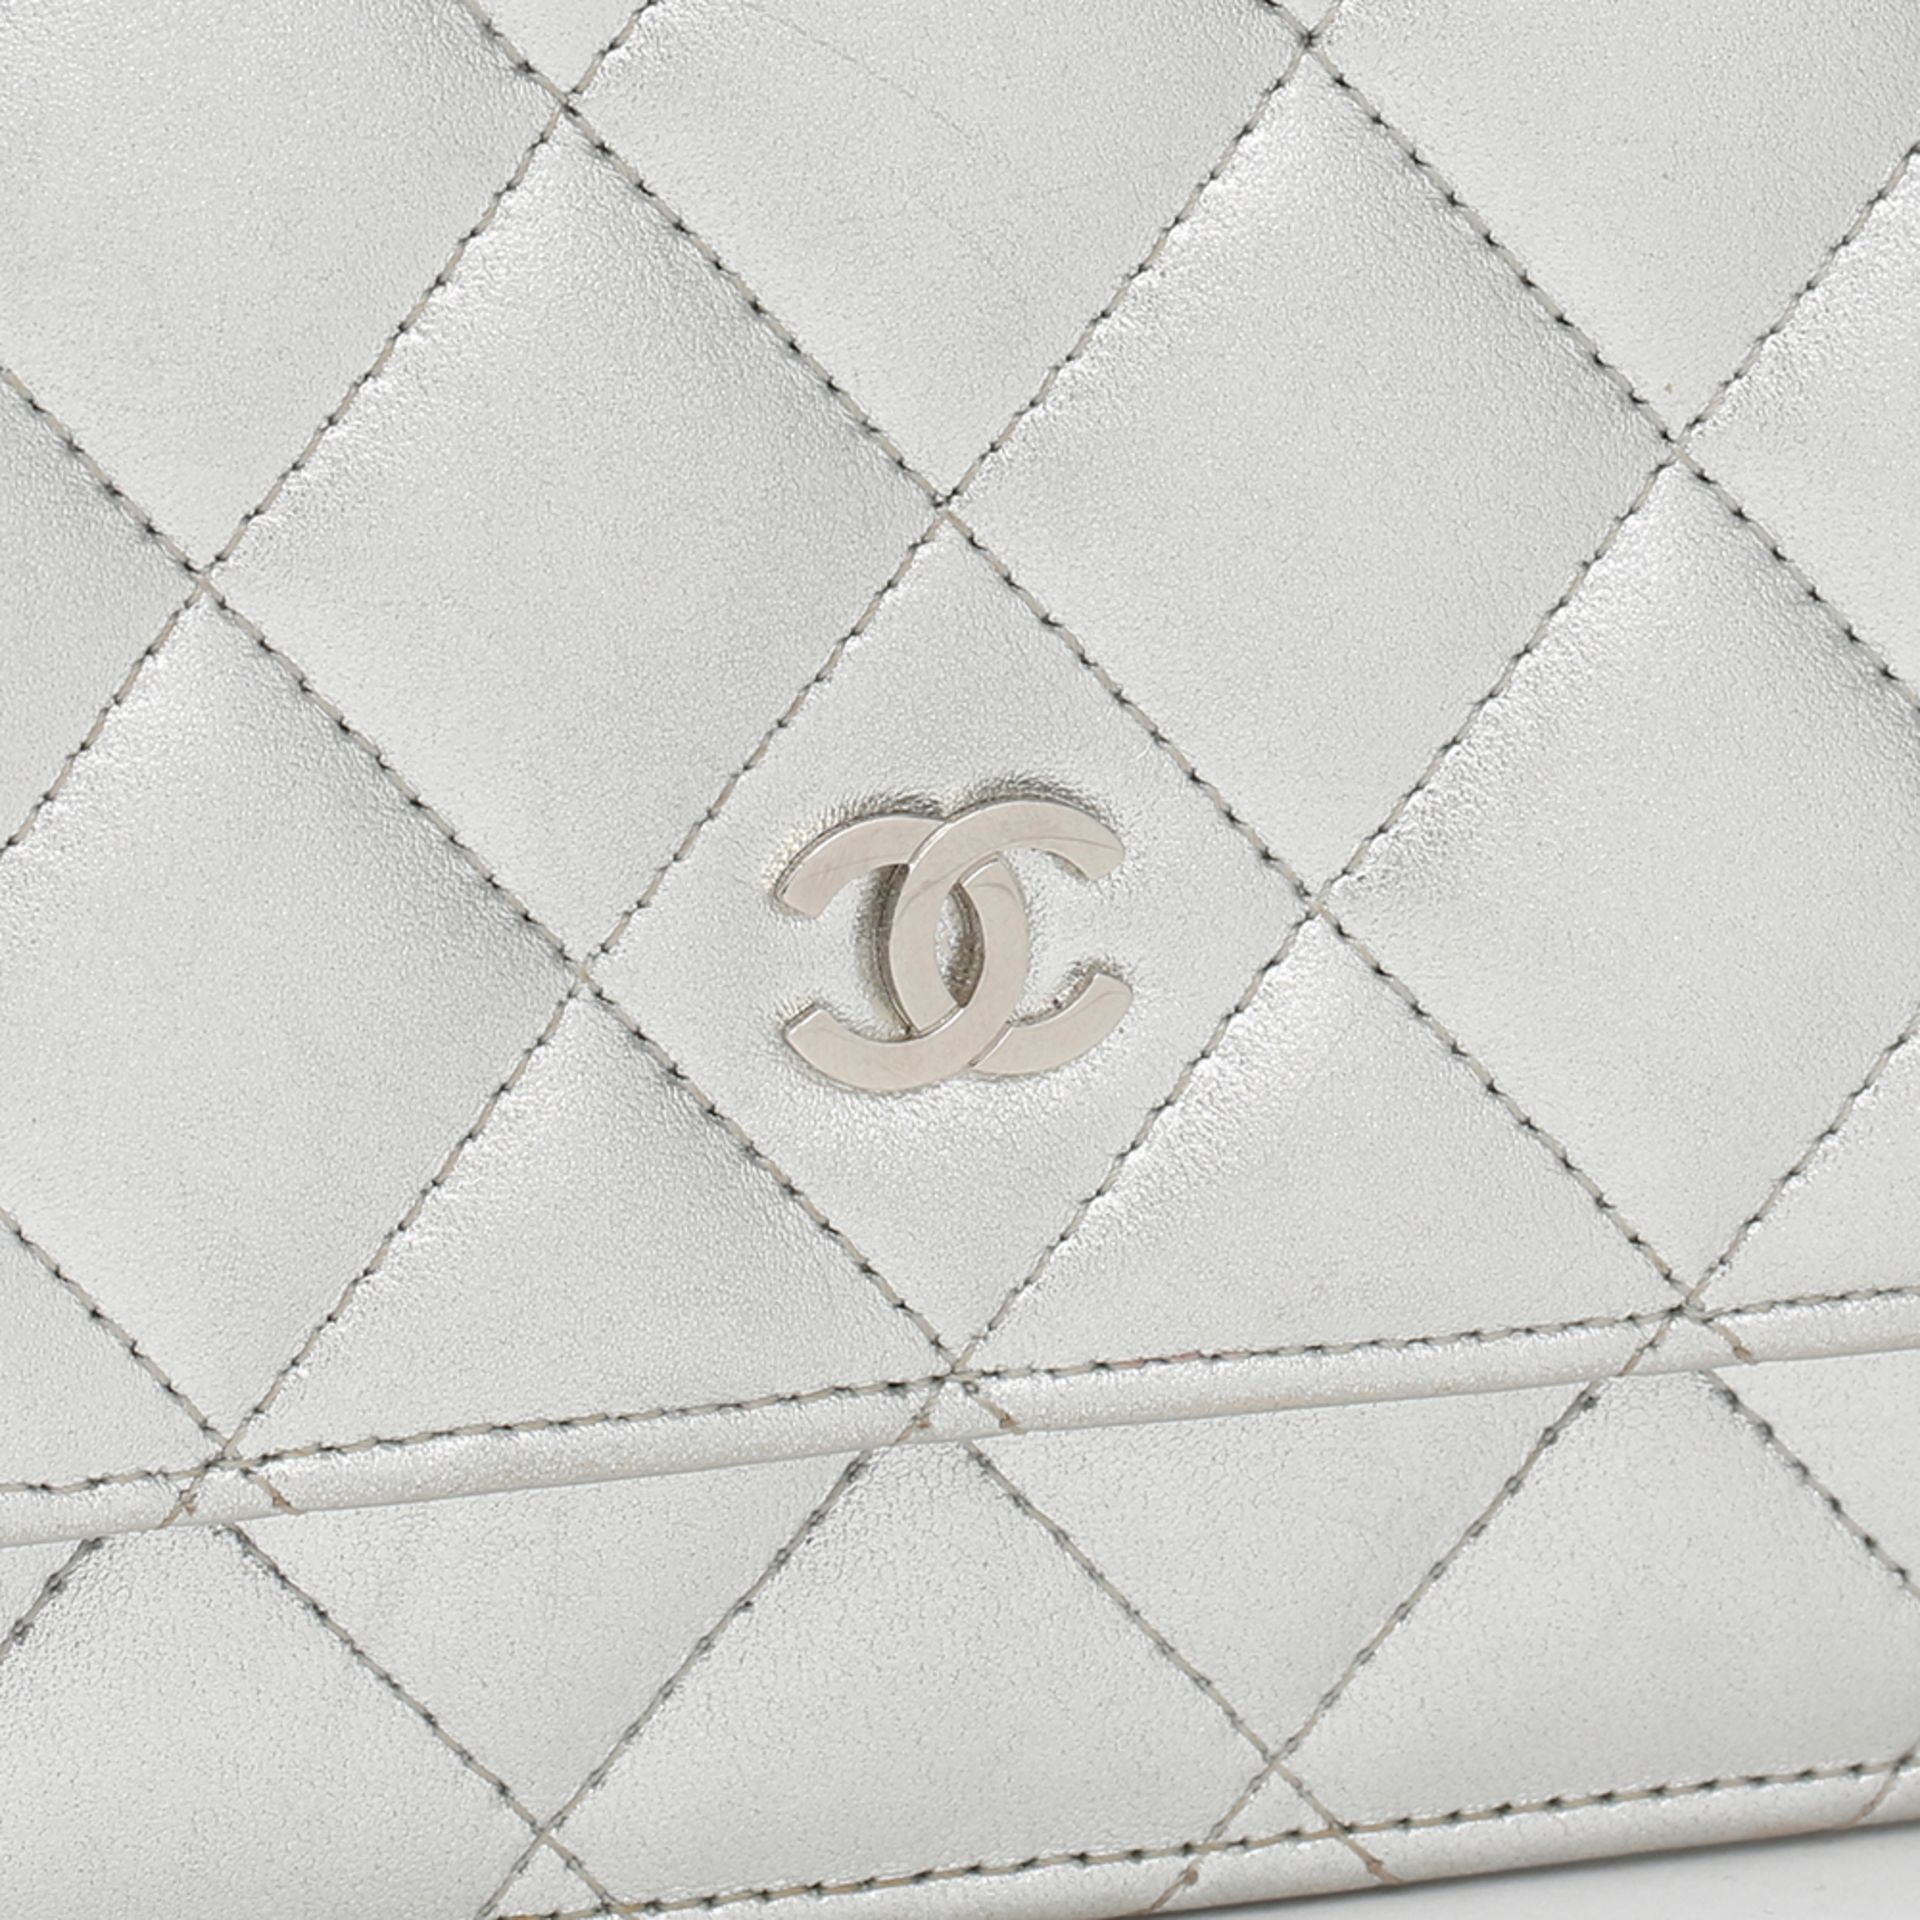 Chanel Silver Quilted Metallic Lambskin Wallet-On-Chain WOC - Image 11 of 11